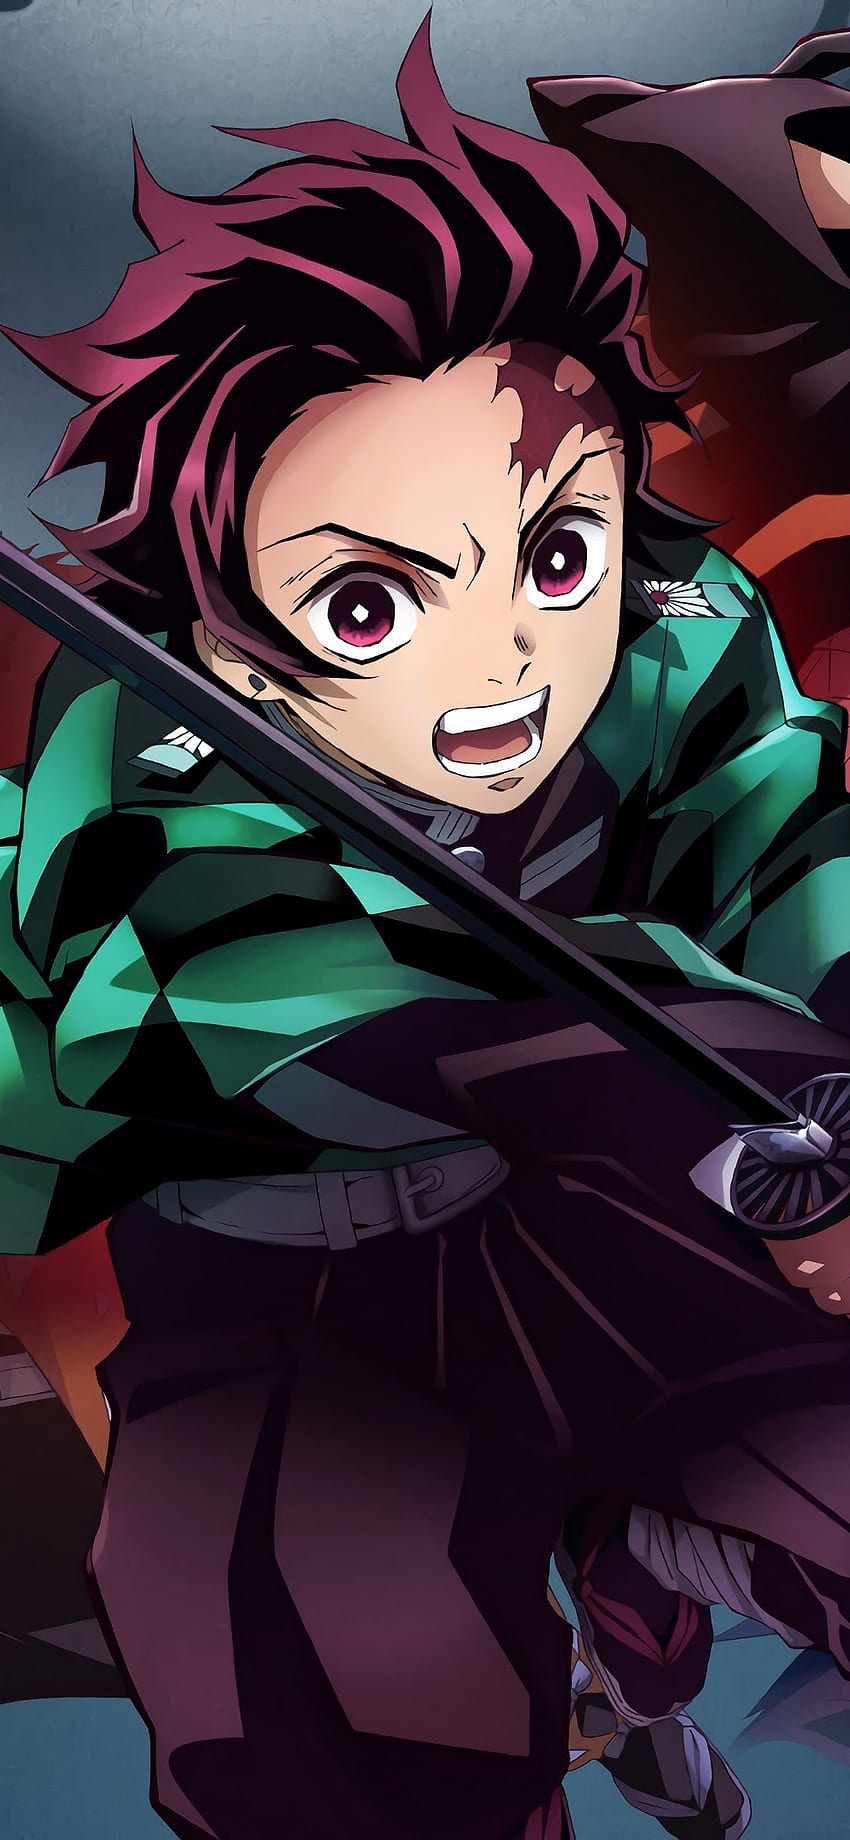 Amazon.com: Anime Tanjirou Poster Canvas Wall Art Anime Tanjirou Room Decor  Office College Decor Boys Gift P-8 24x36inch(60x90cm) Frame-Style: Posters  & Prints